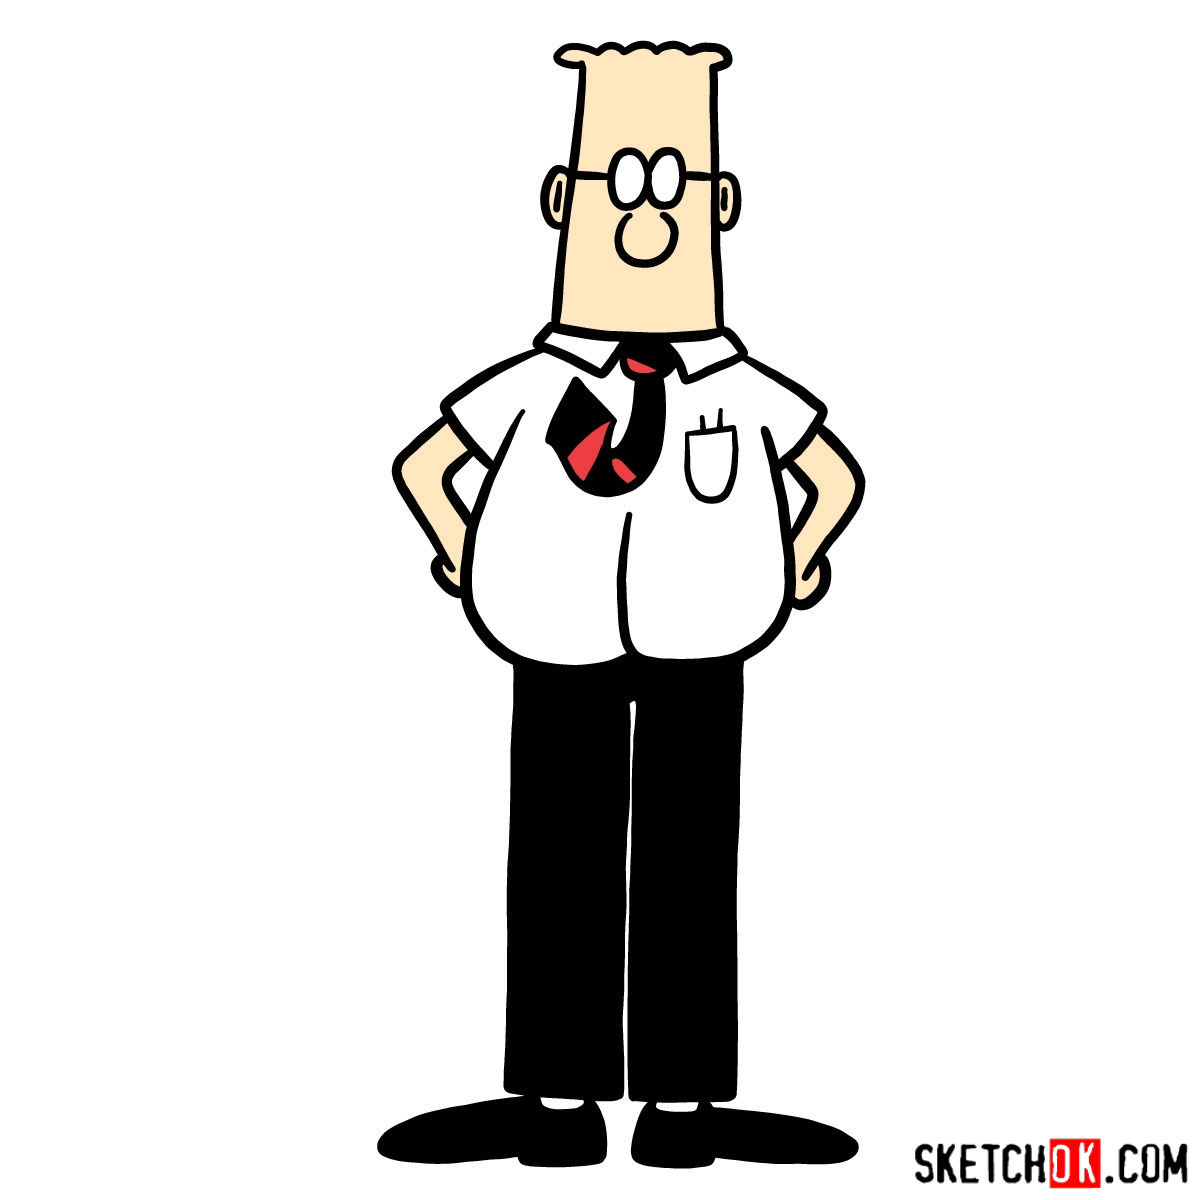 How to draw Dilbert (comic strip and cartoon character) - Sketchok easy  drawing guides